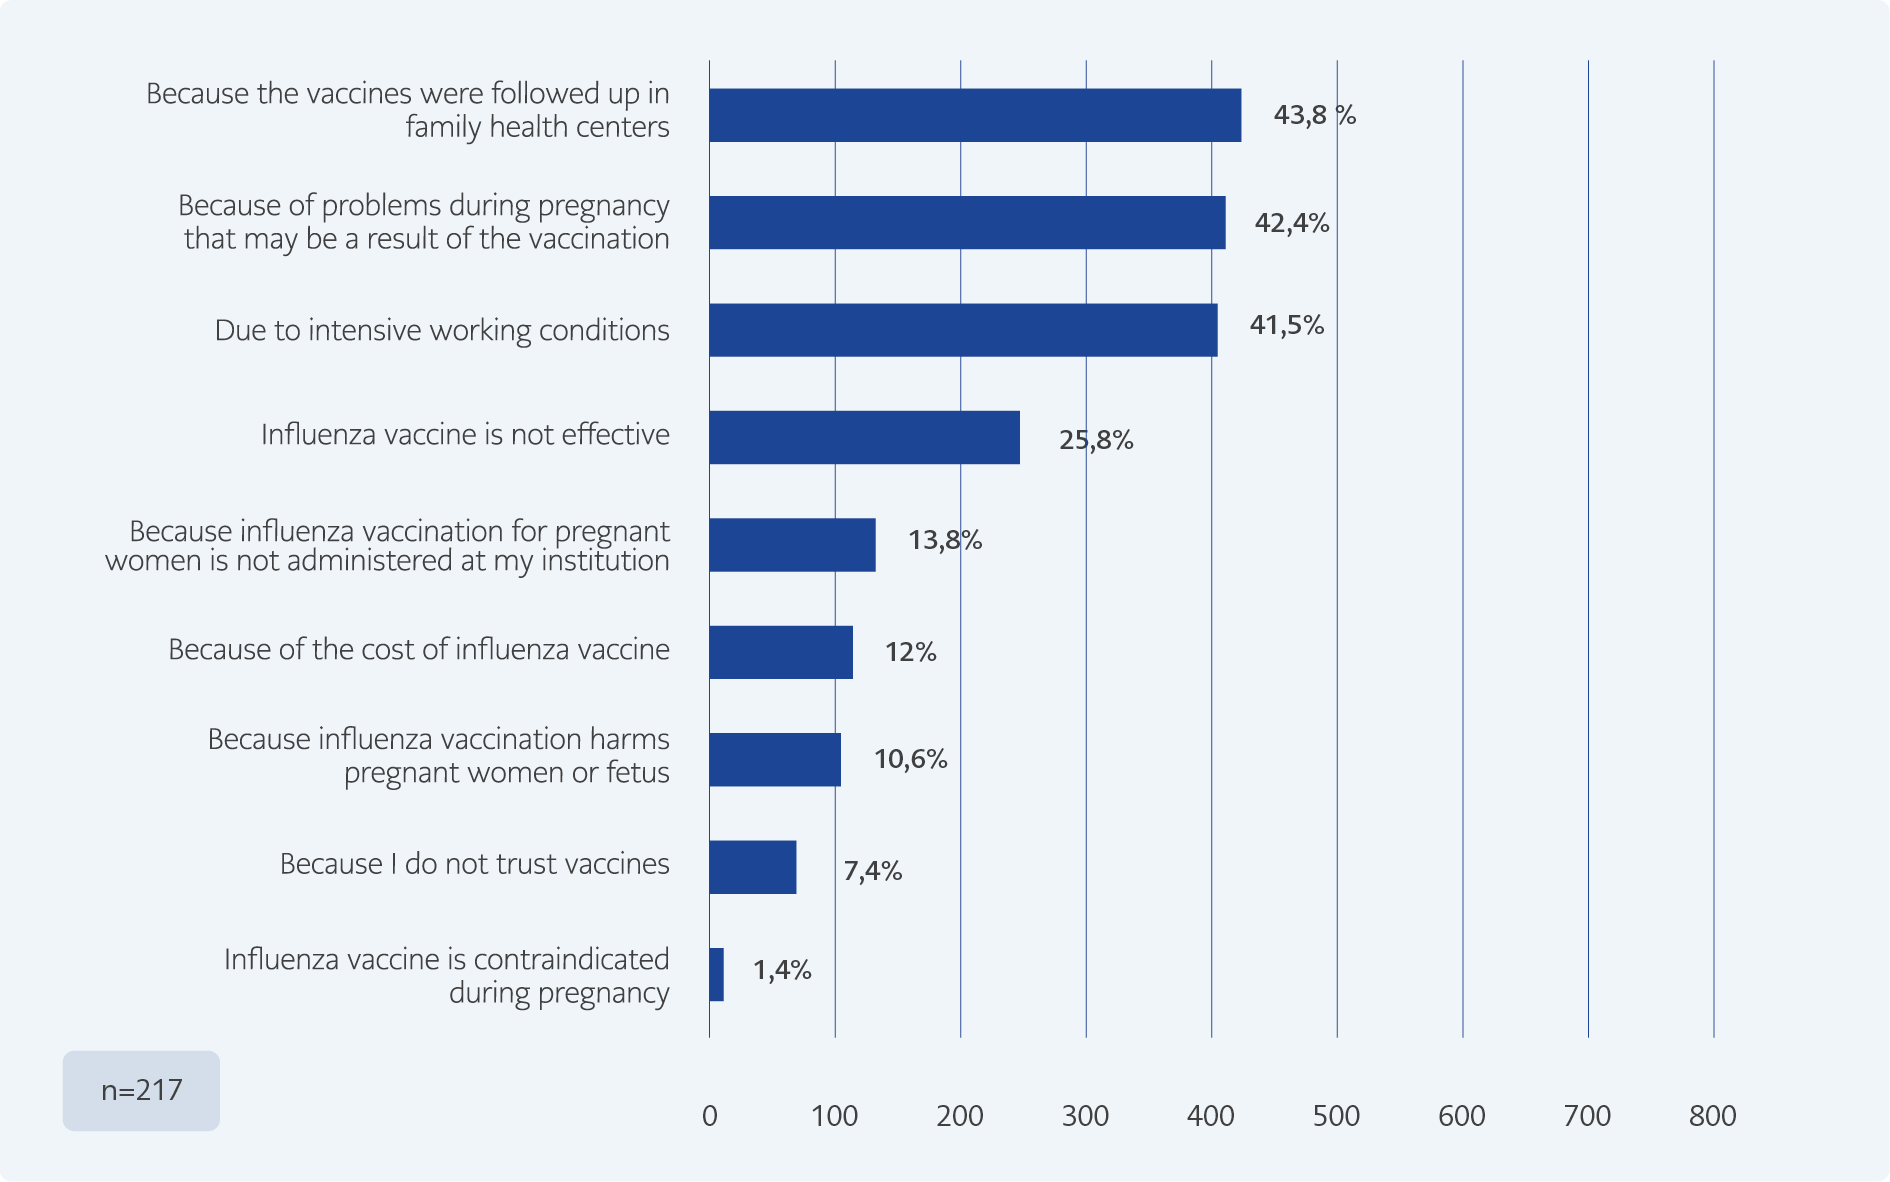 <strong>Figure 2.</strong> The reasons for not recommending influenza vaccination for pregnant women